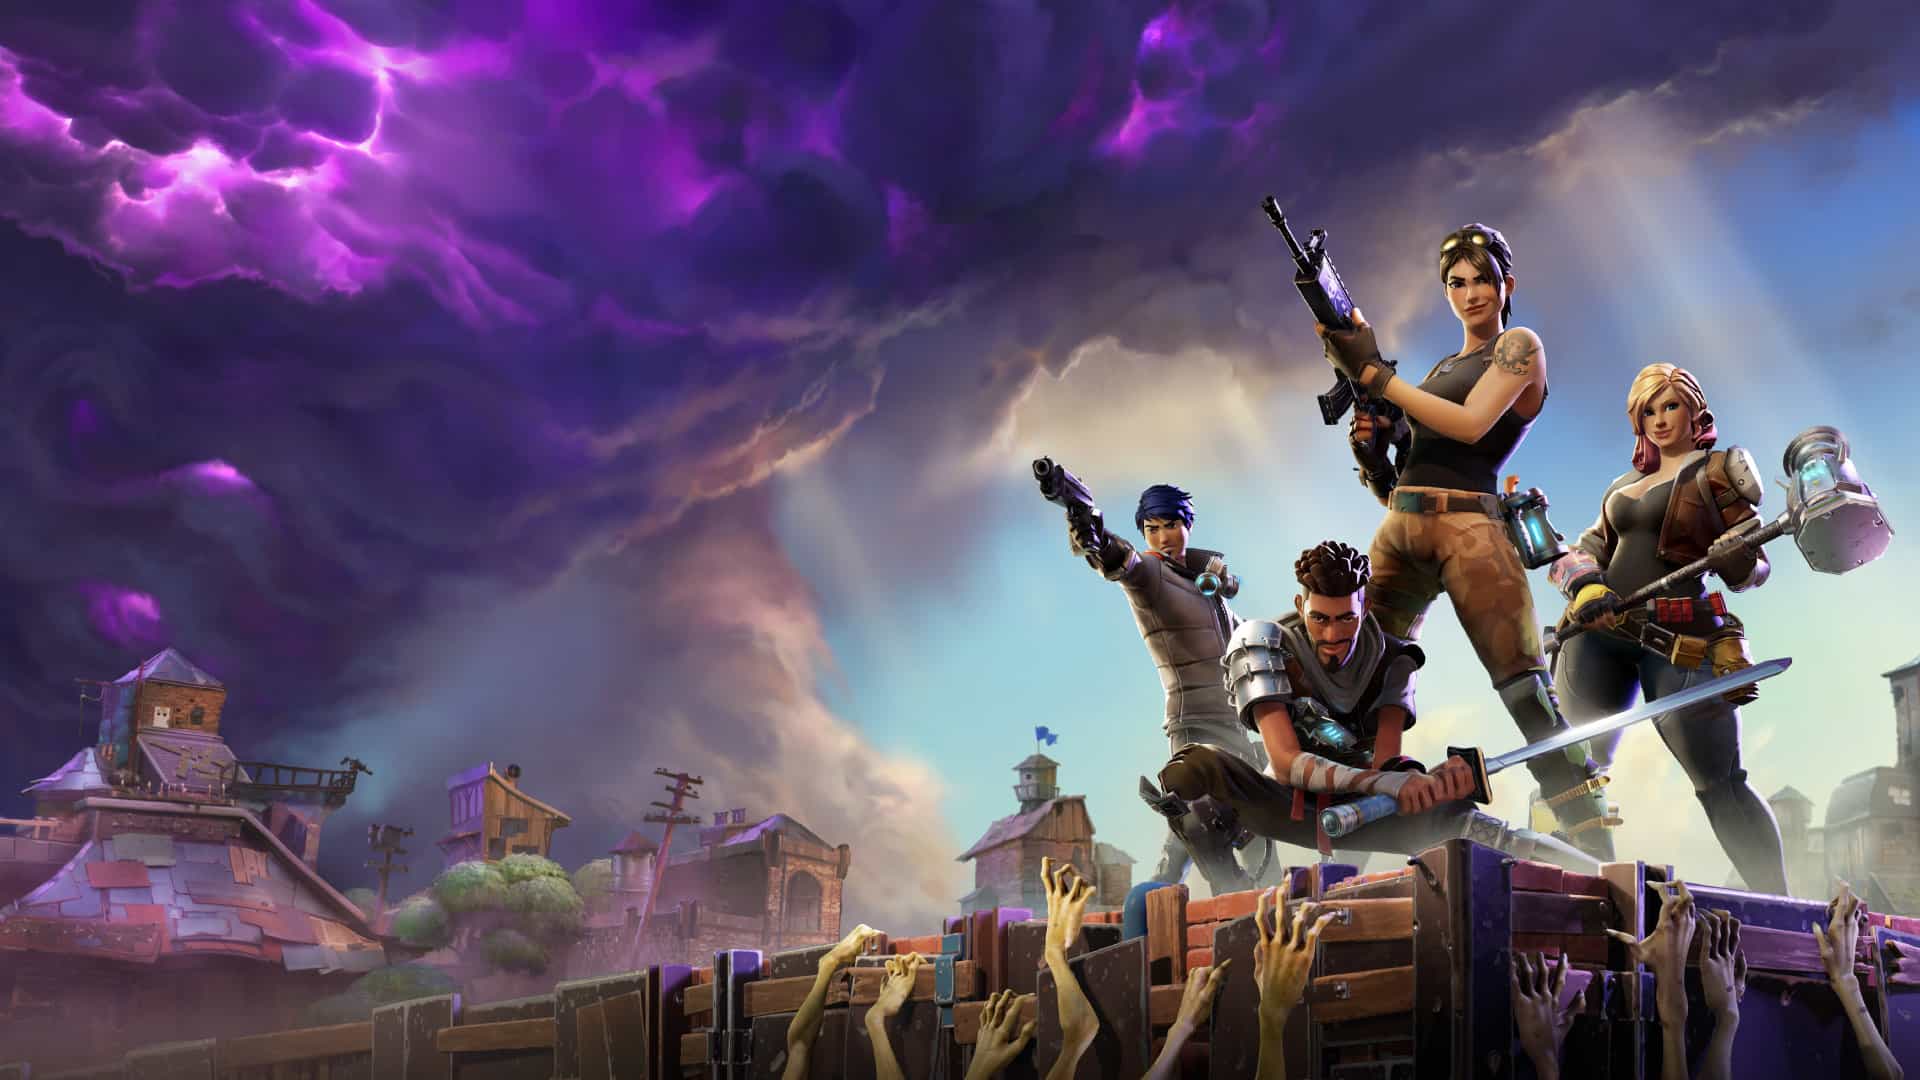 Fortnite Twitch Stream Most Watched And Most Streamed Game On Twitch Mp1st